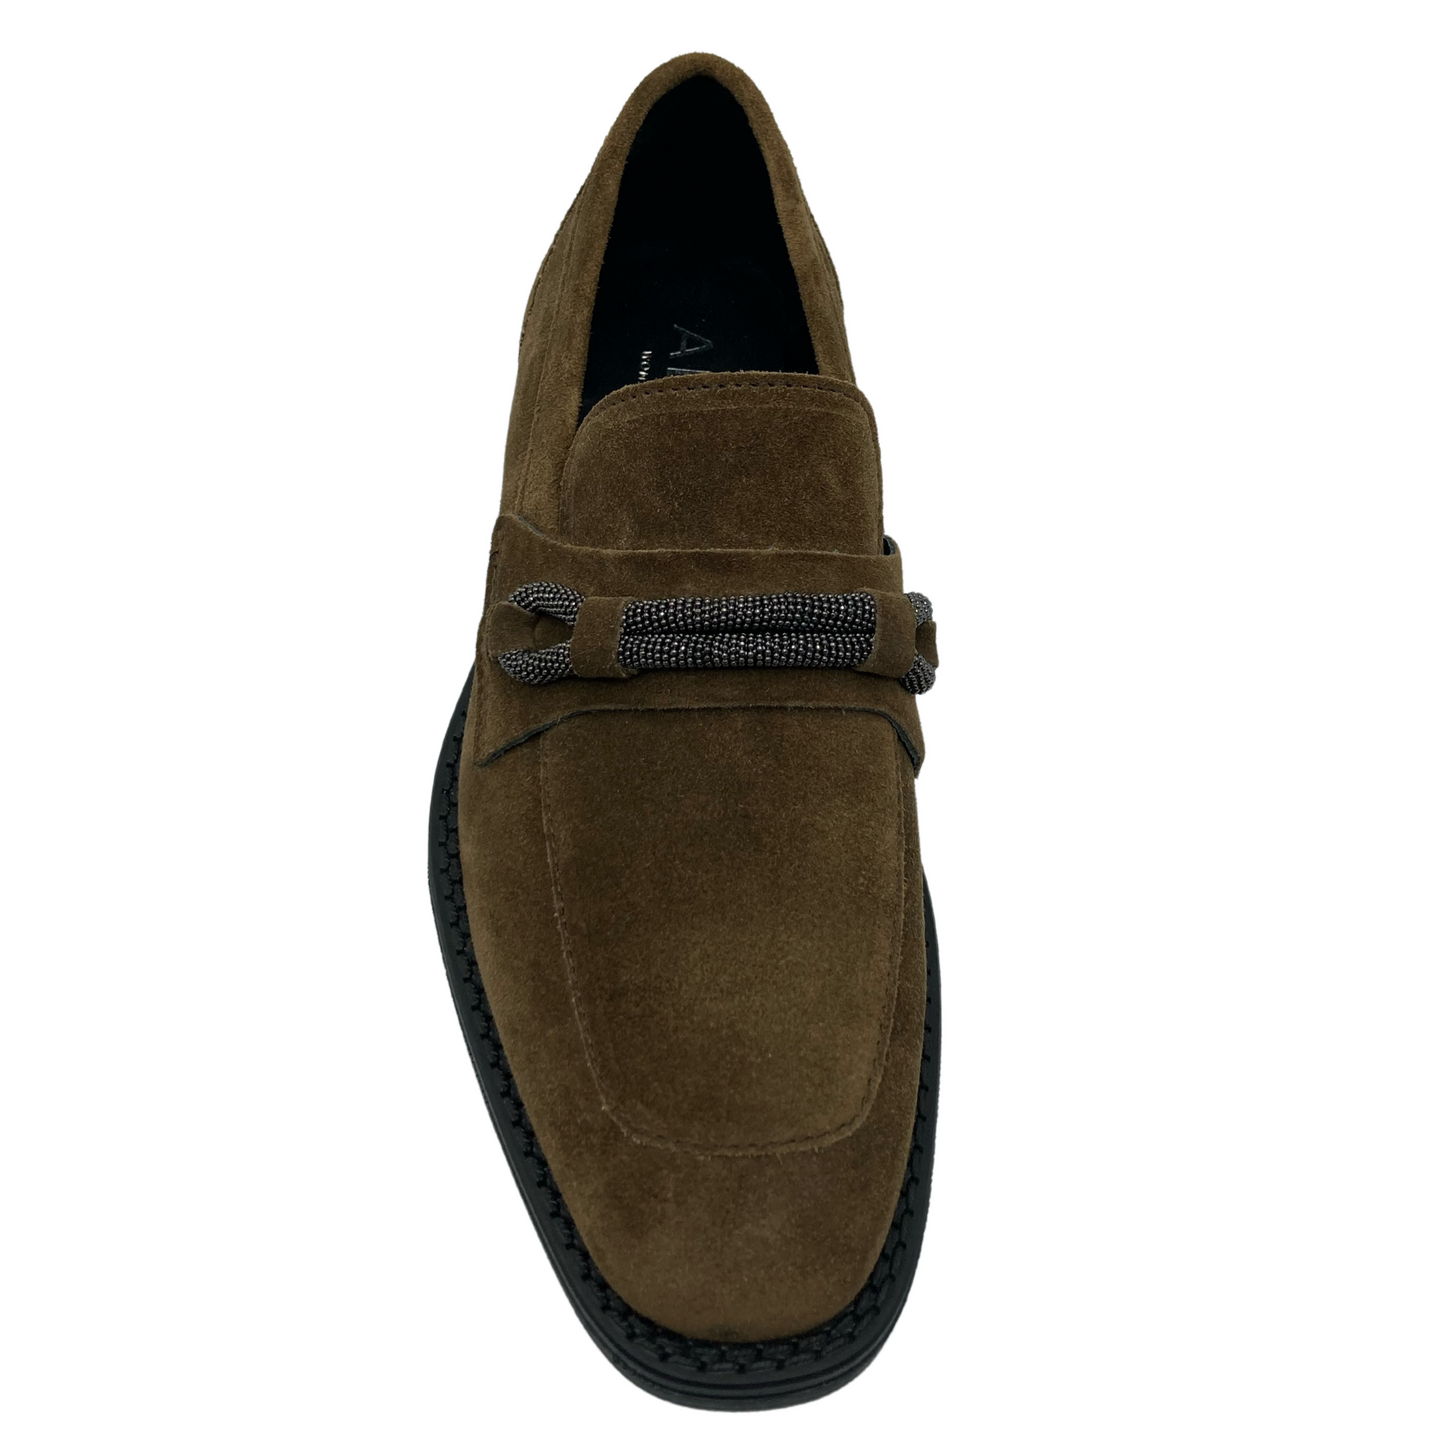 Top view of brown suede loafer with squared toe and black lining